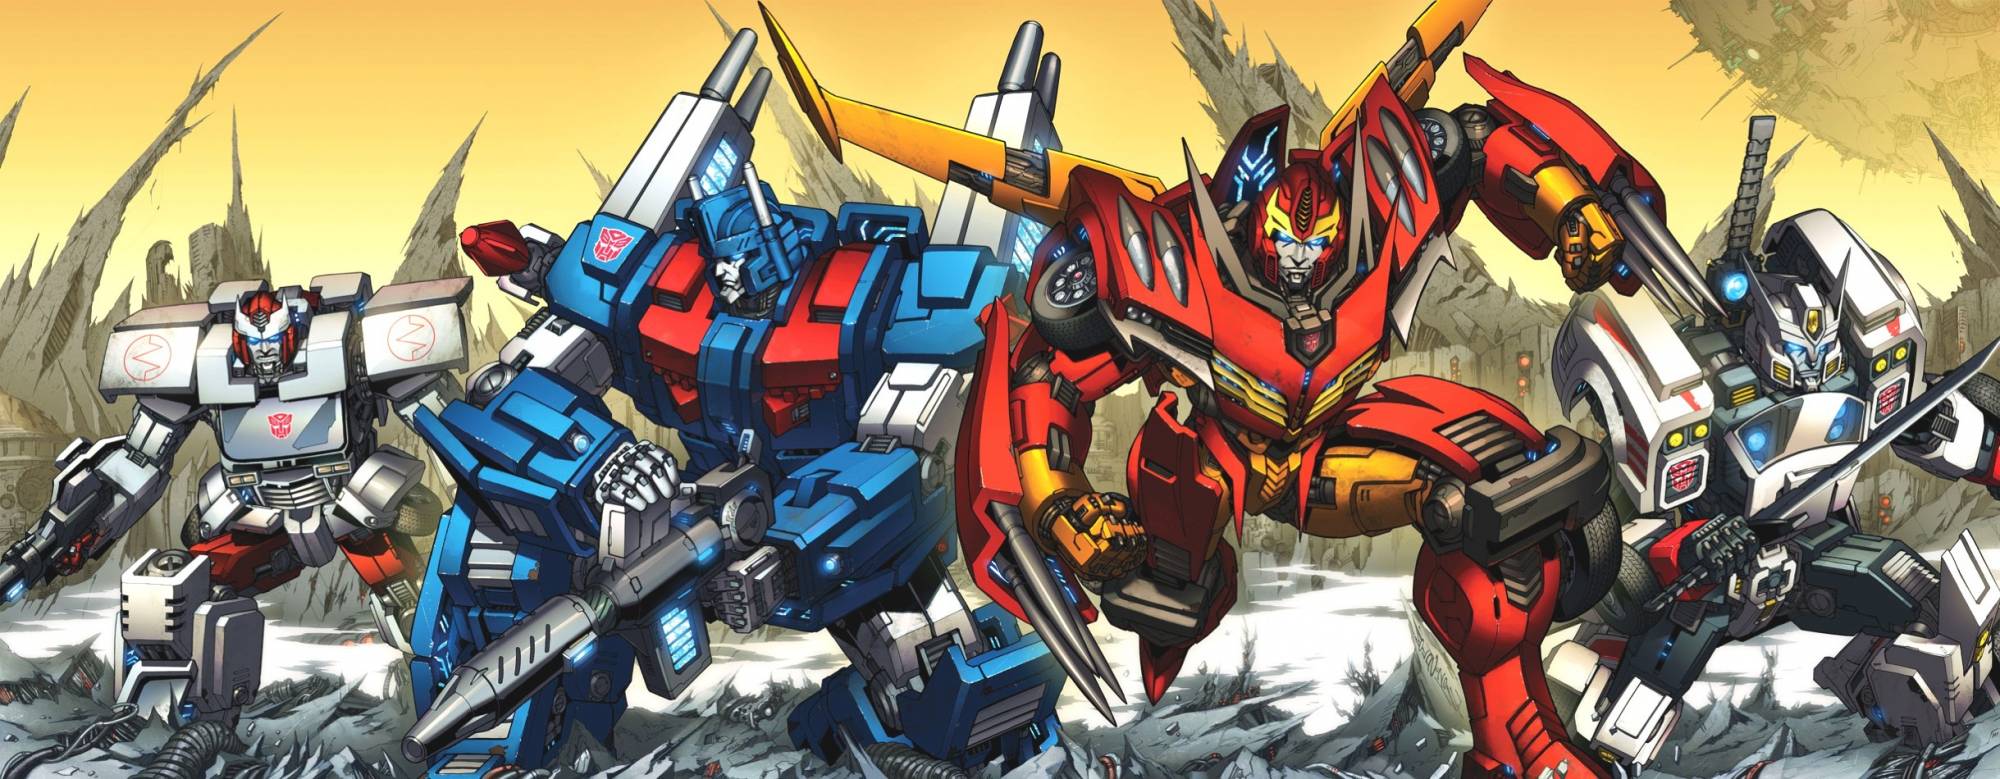 IDW Transformers: More Than Meets The Eye #1